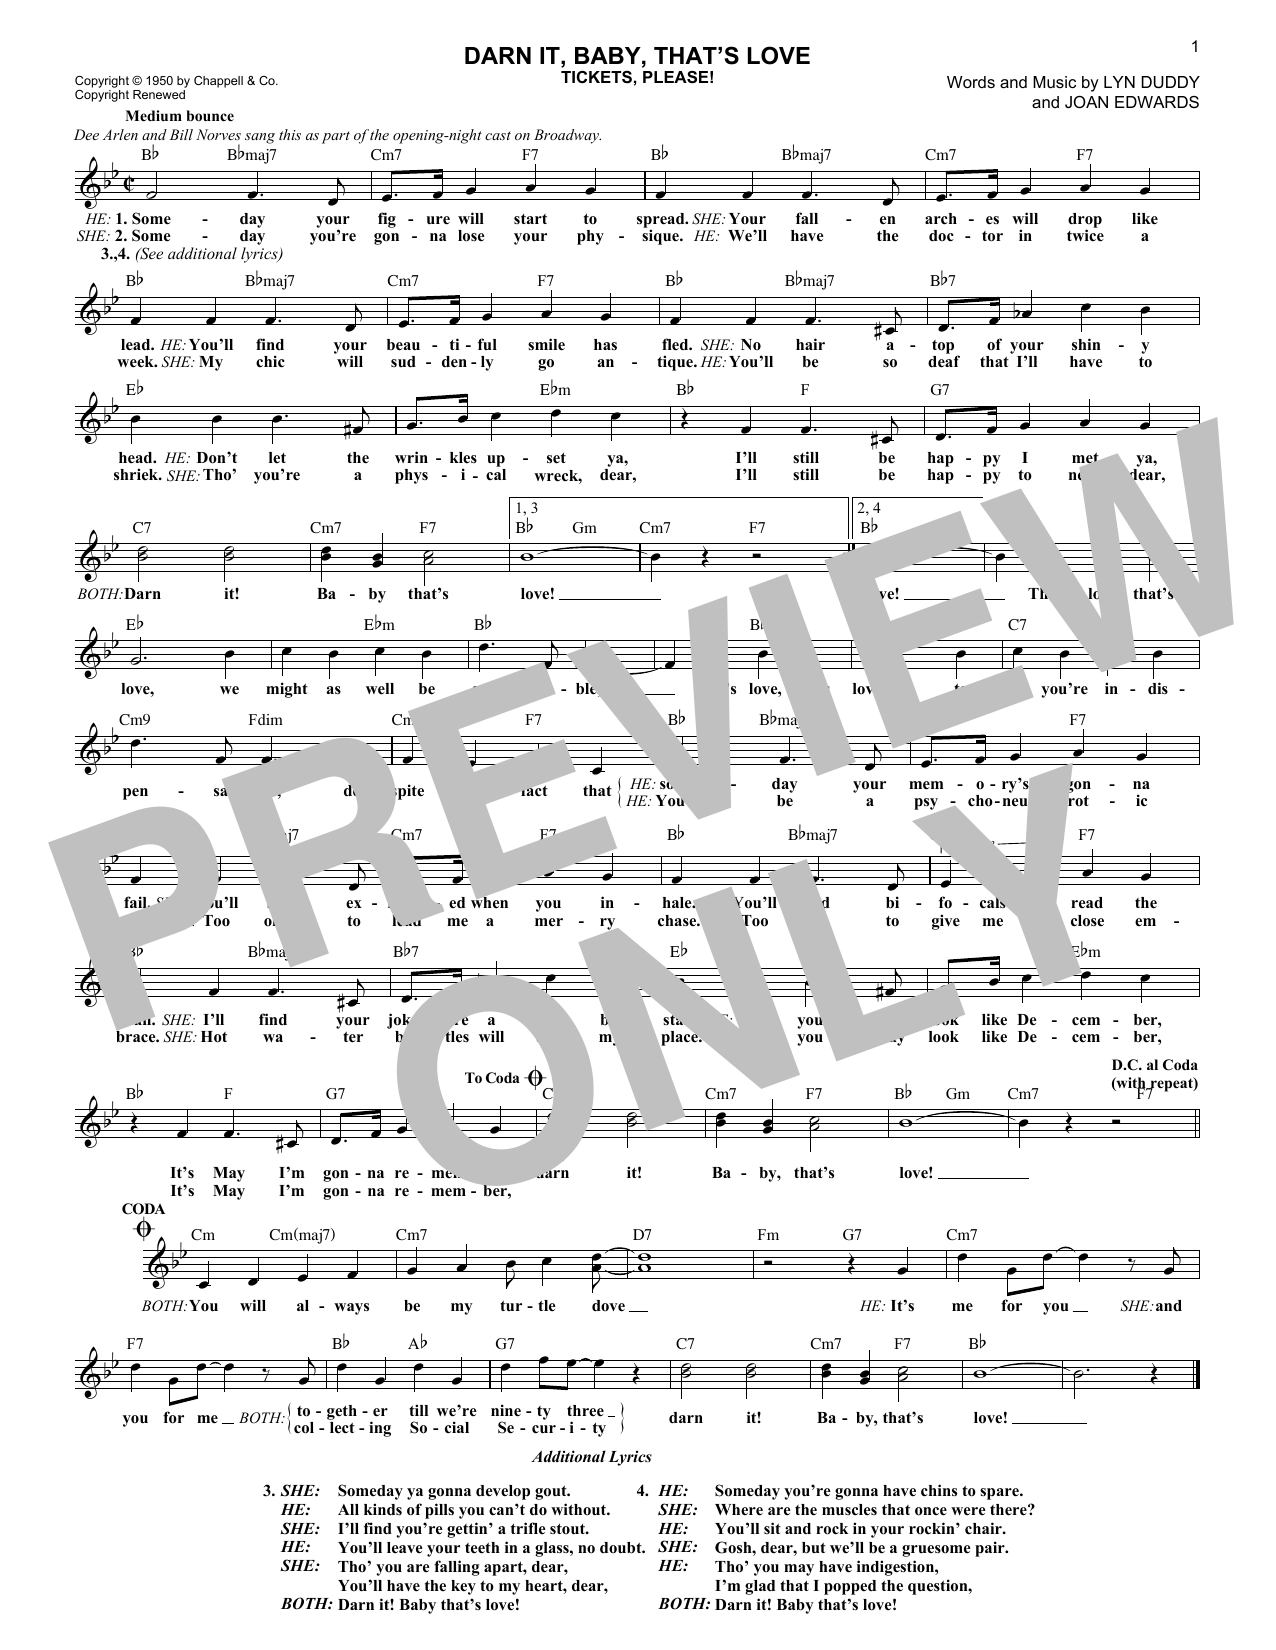 Download Steve Lawrence and Eydie Gorme Darn It, Baby, That's Love Sheet Music